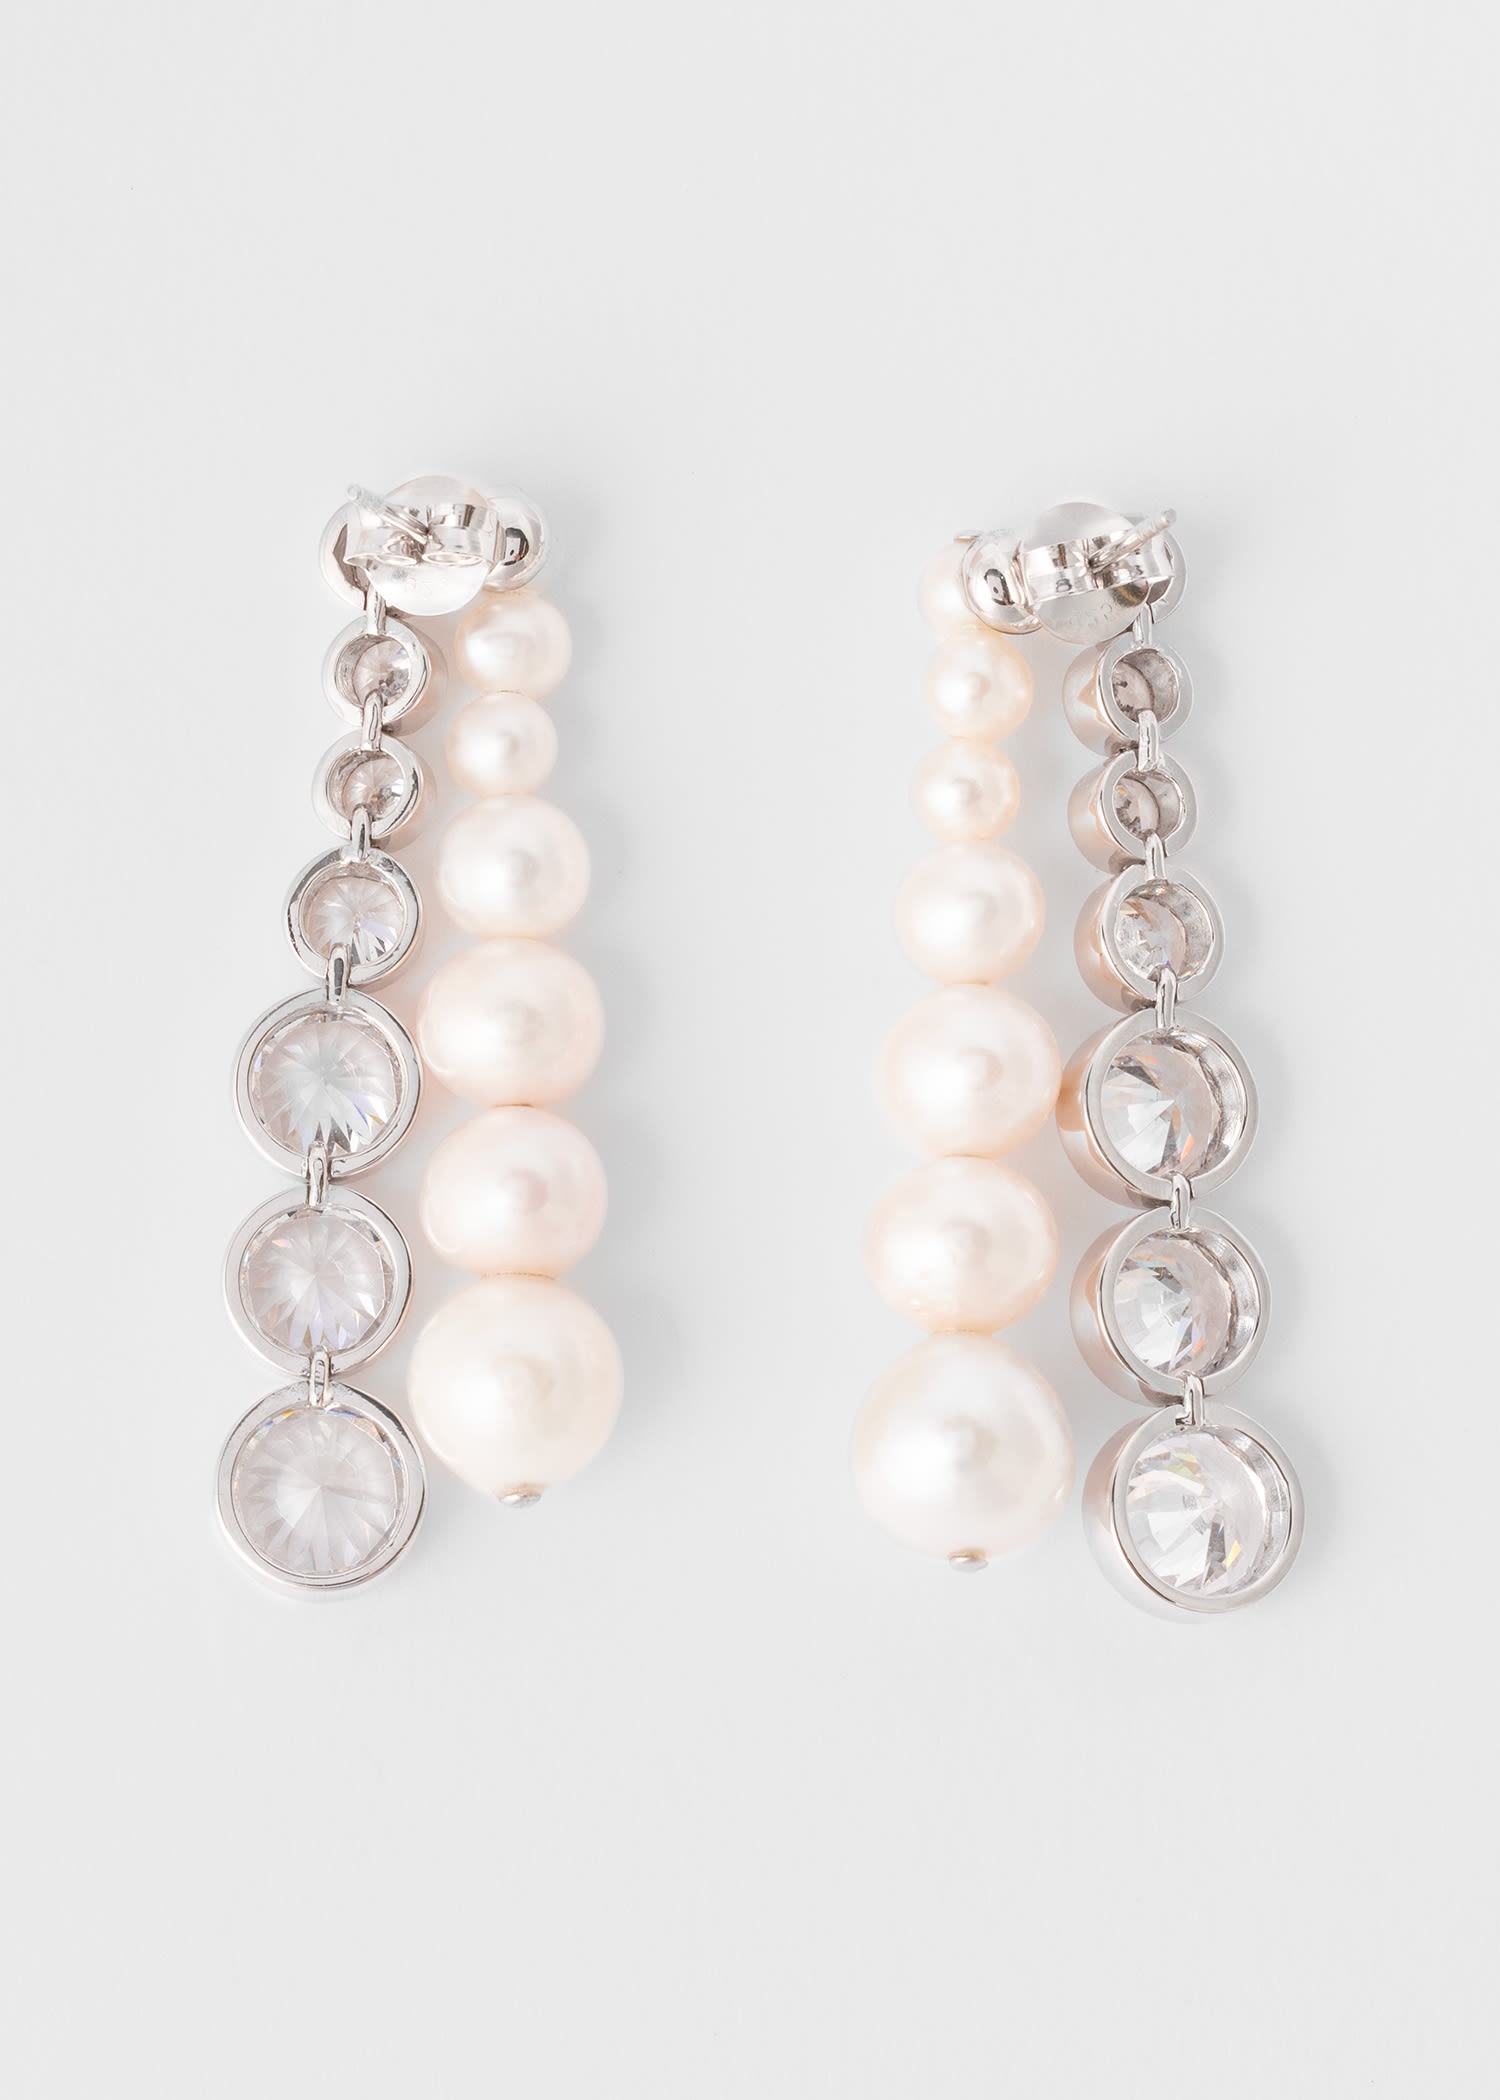 Pearl & Cubic Zirconia Platinum Earrings by Completedworks - 3